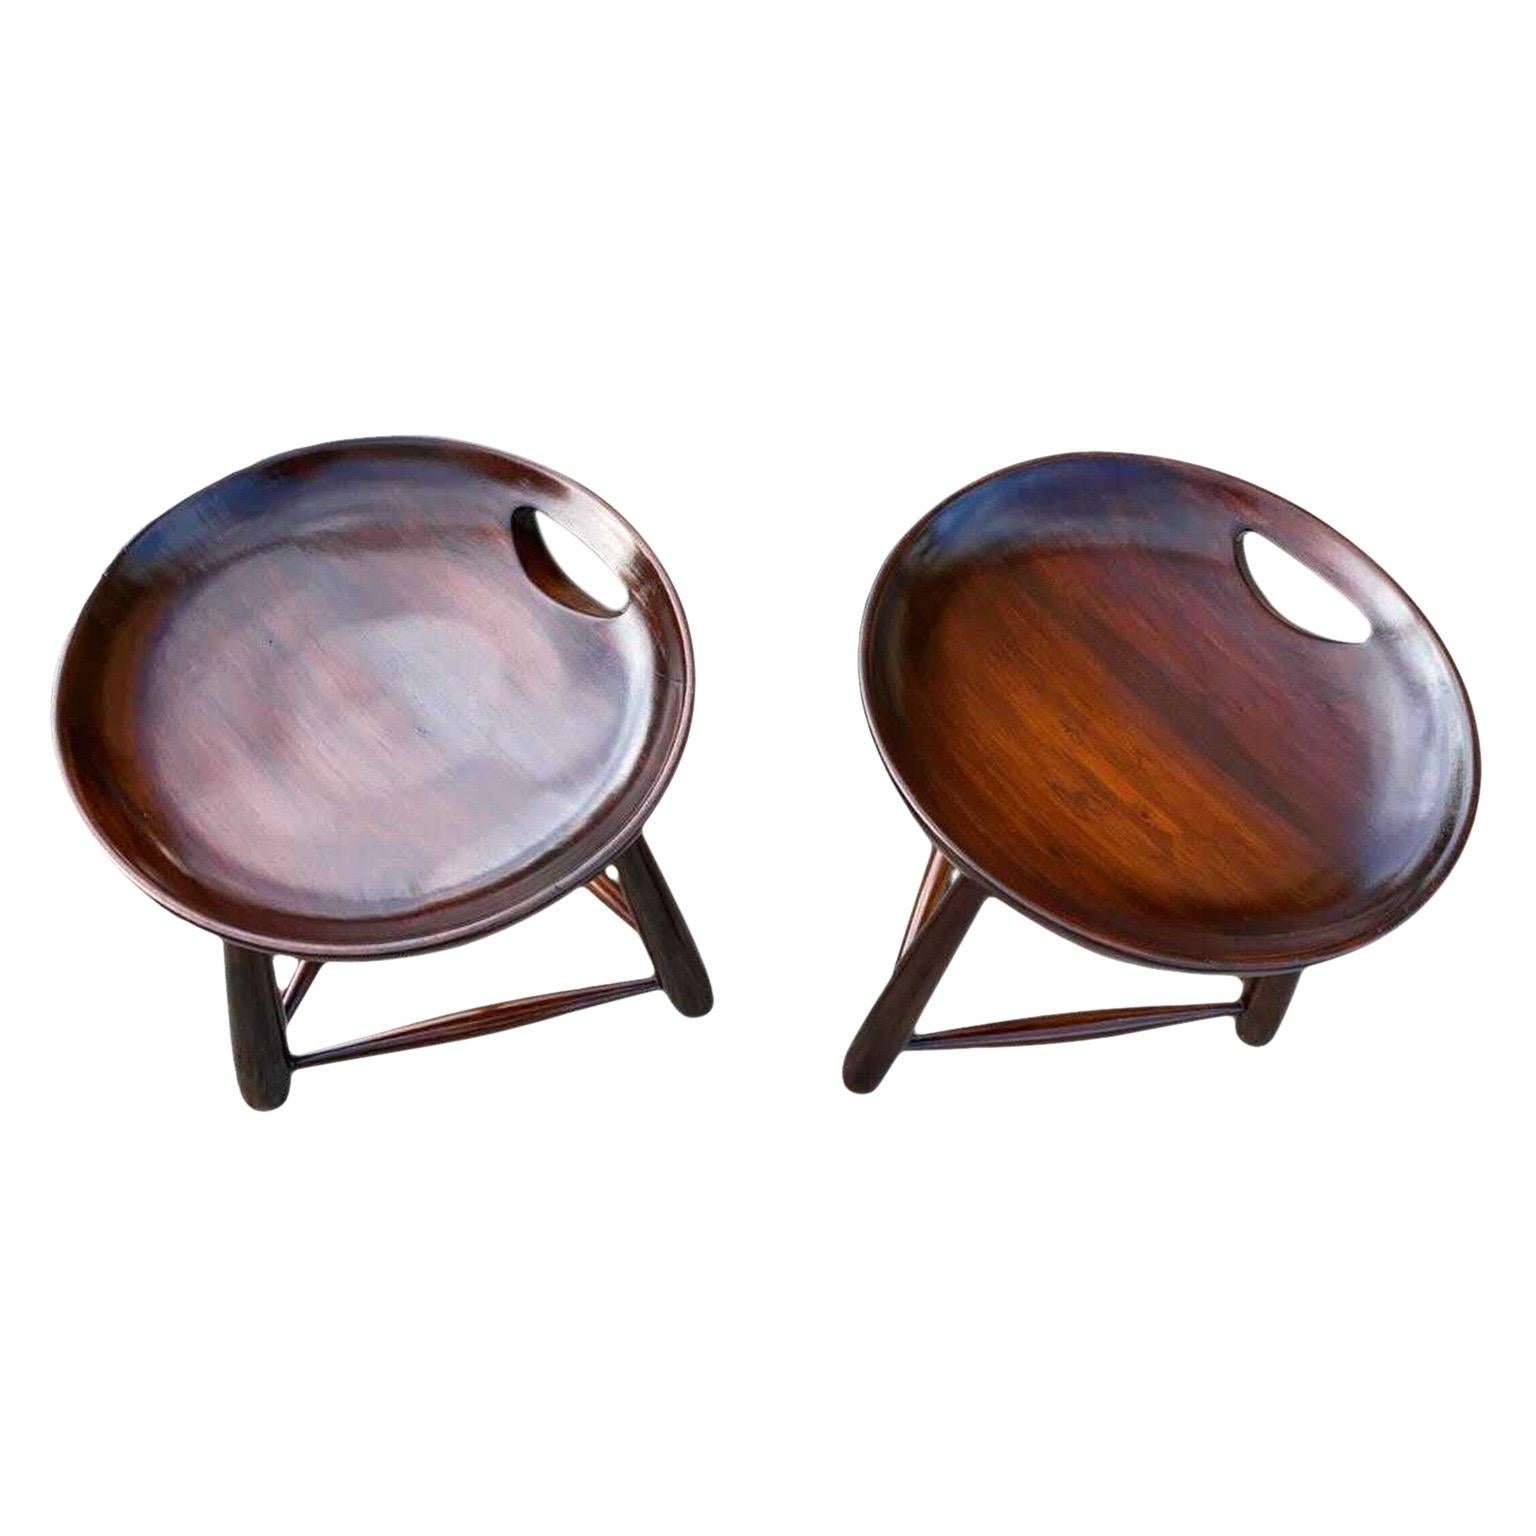 Mid-20th Century Iconic Mocho Stools by Sergio Rodrigues